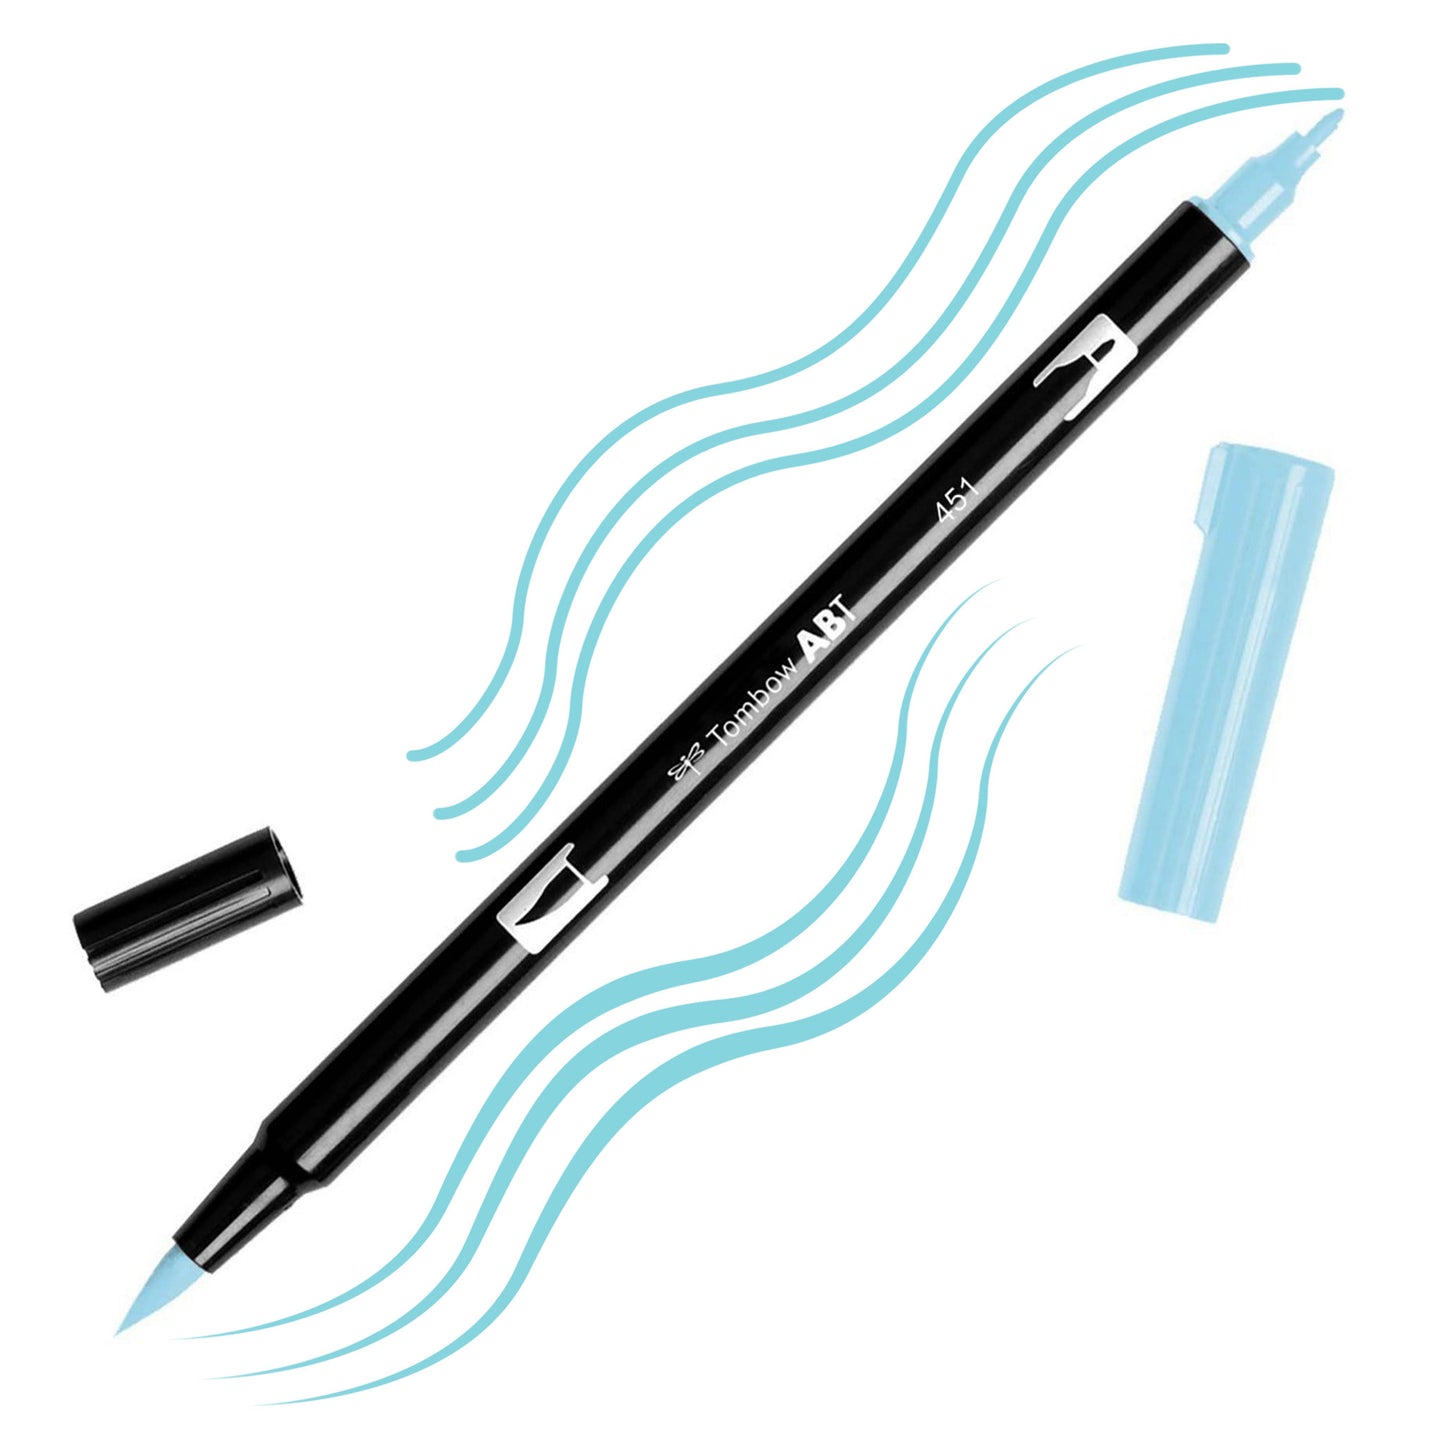 Sky Blue Tombow double-headed brush-pen with a flexible nylon fiber brush tip and a fine tip against a white background with sky blue strokes